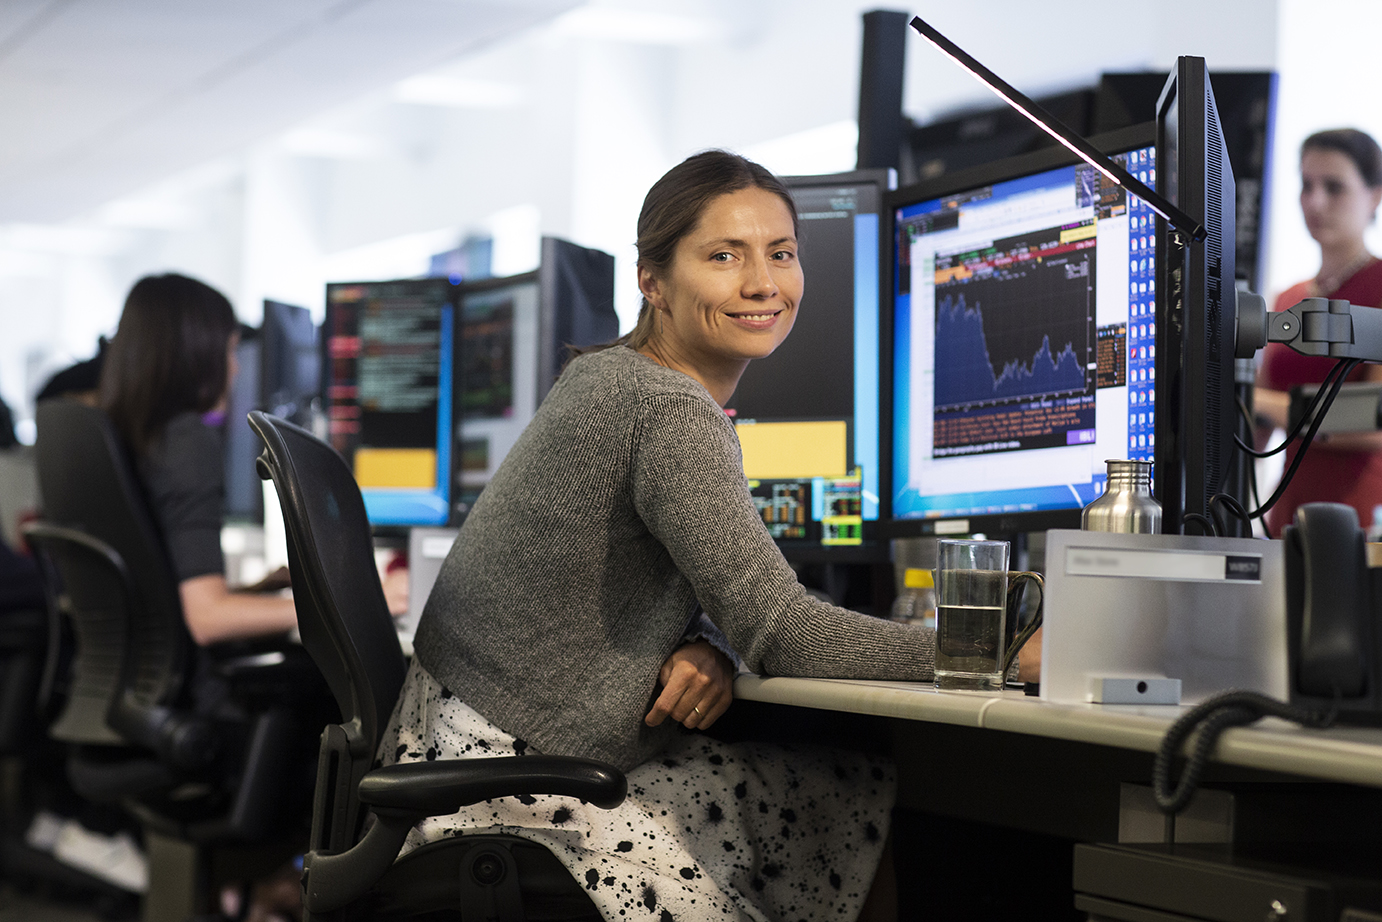 Woman sitting at her workstation smiling at the camera on the trading floor.